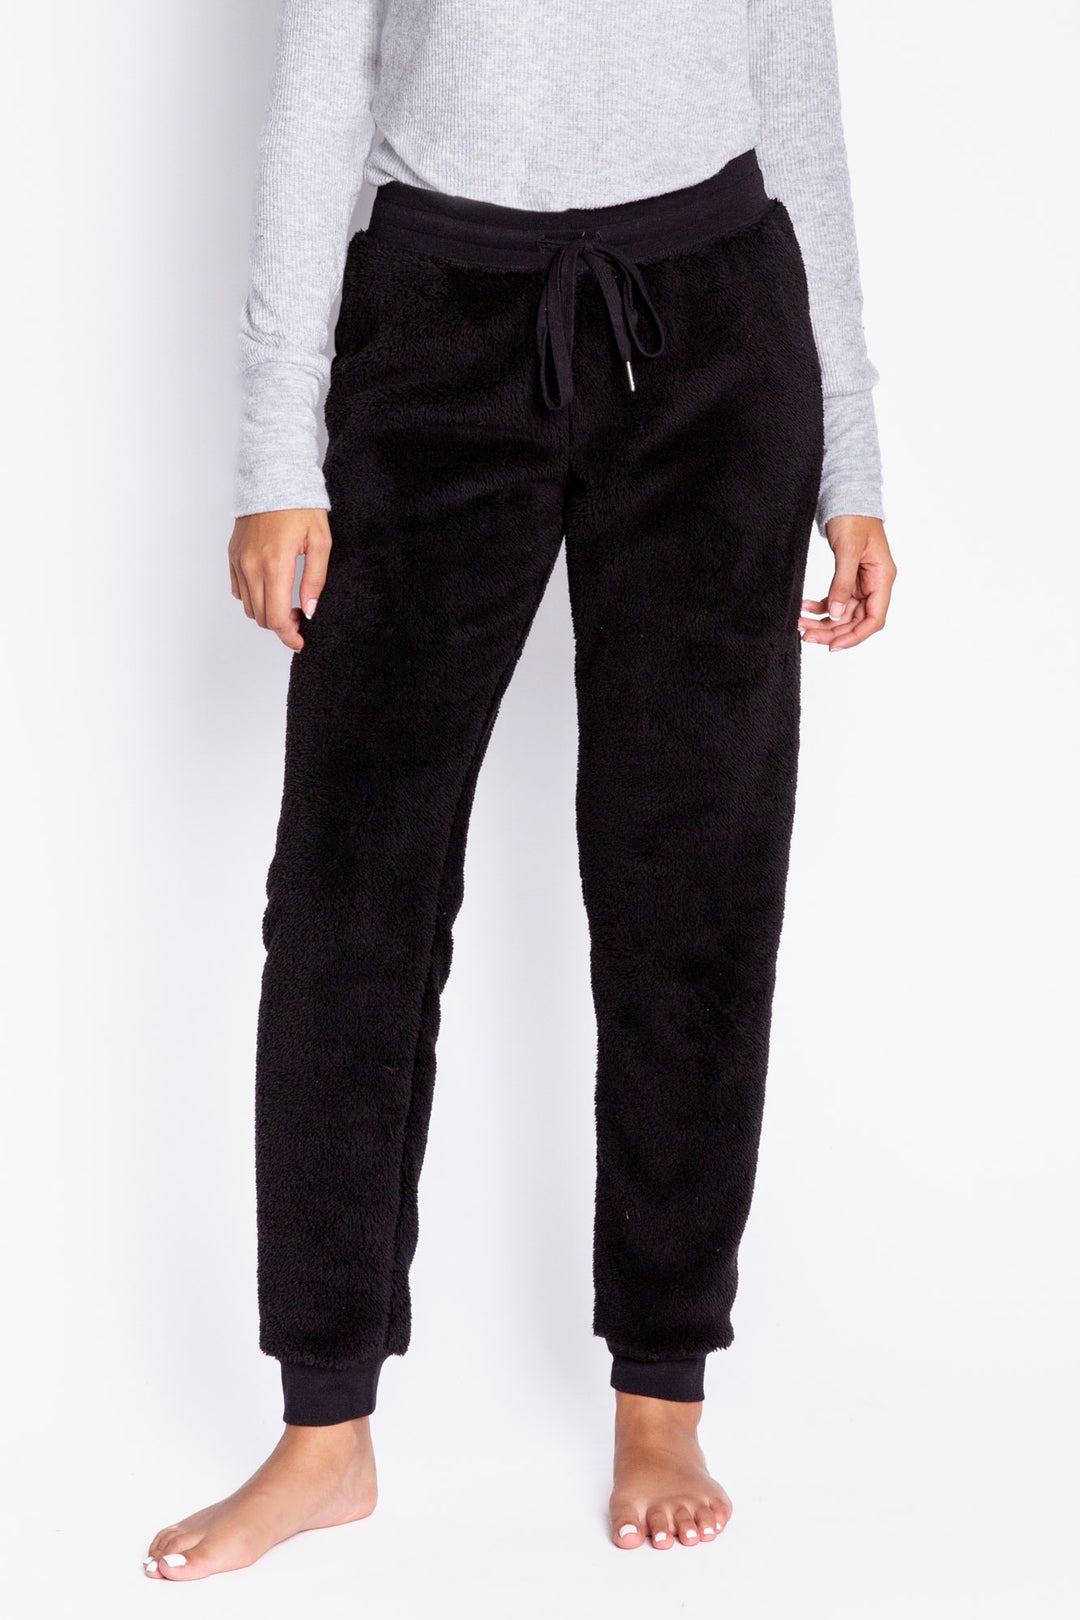 Black-deep grey speckled faux fur cozy pant. Banded rib knit bottom & waistband with tie. (6982902284388)